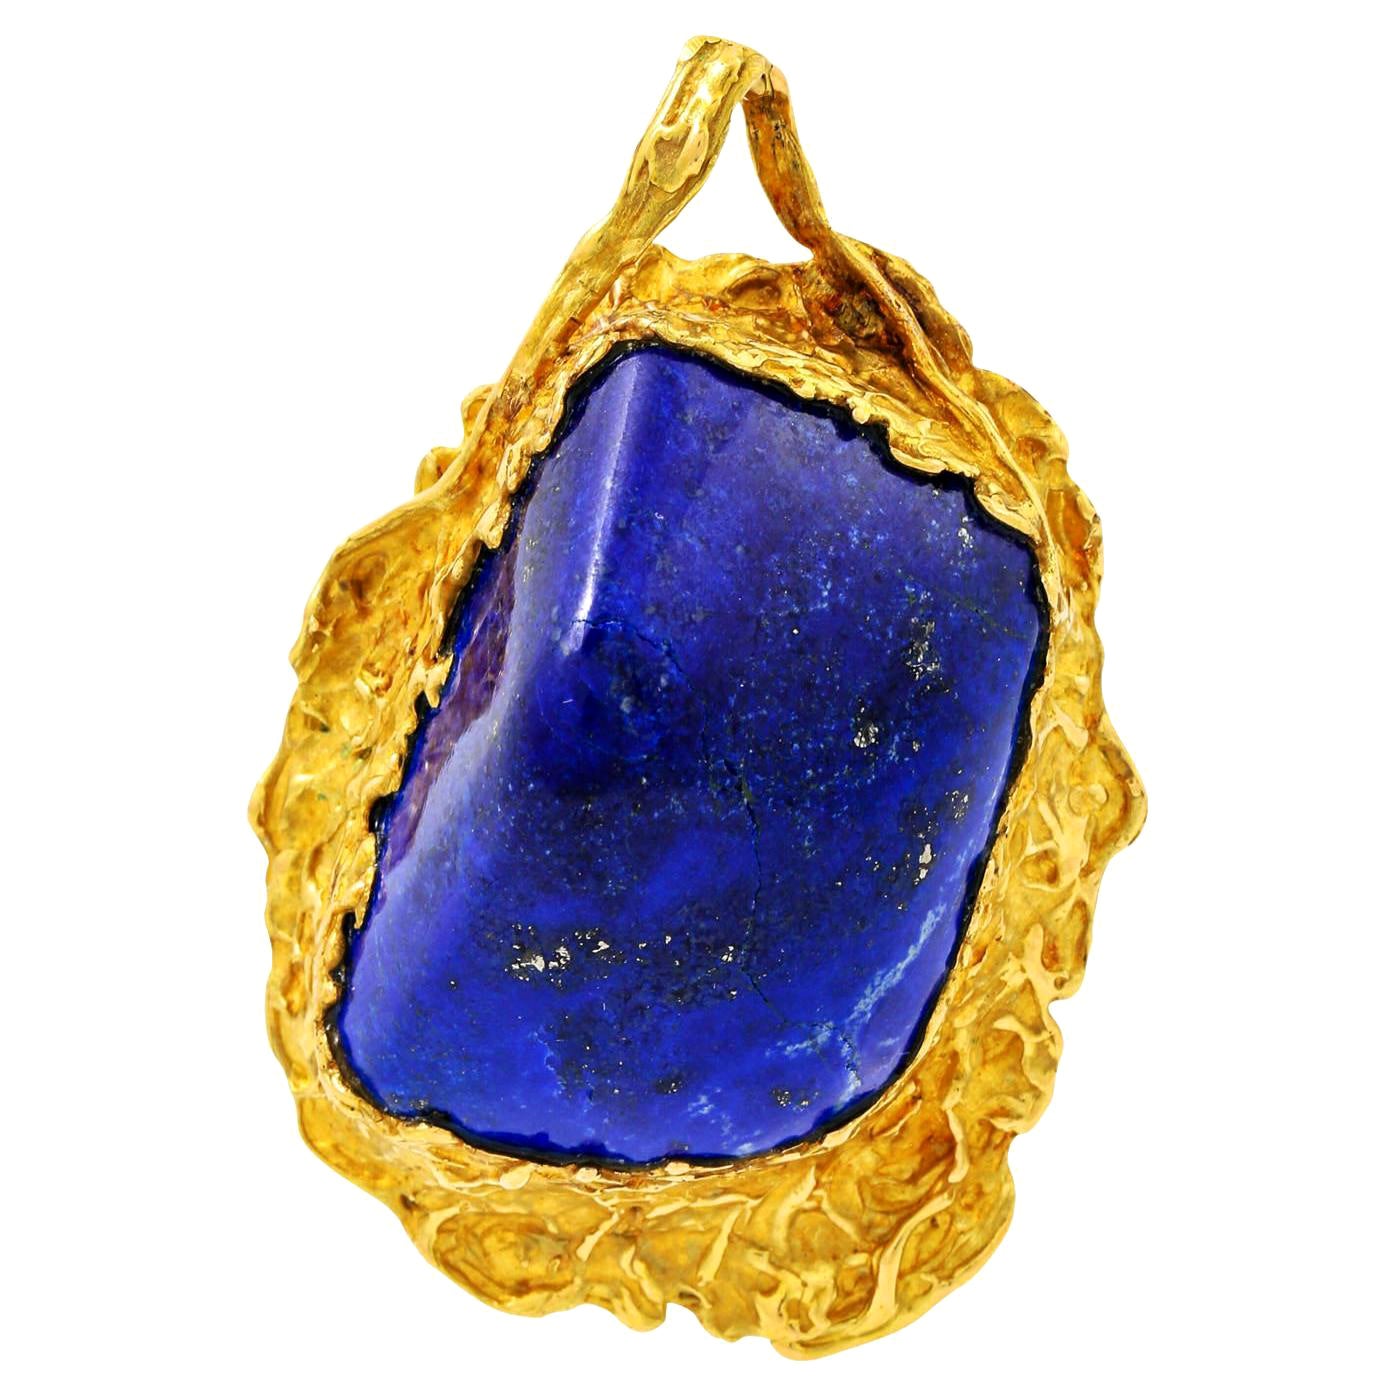 Pendant with Large Lapis Lazuli For Sale